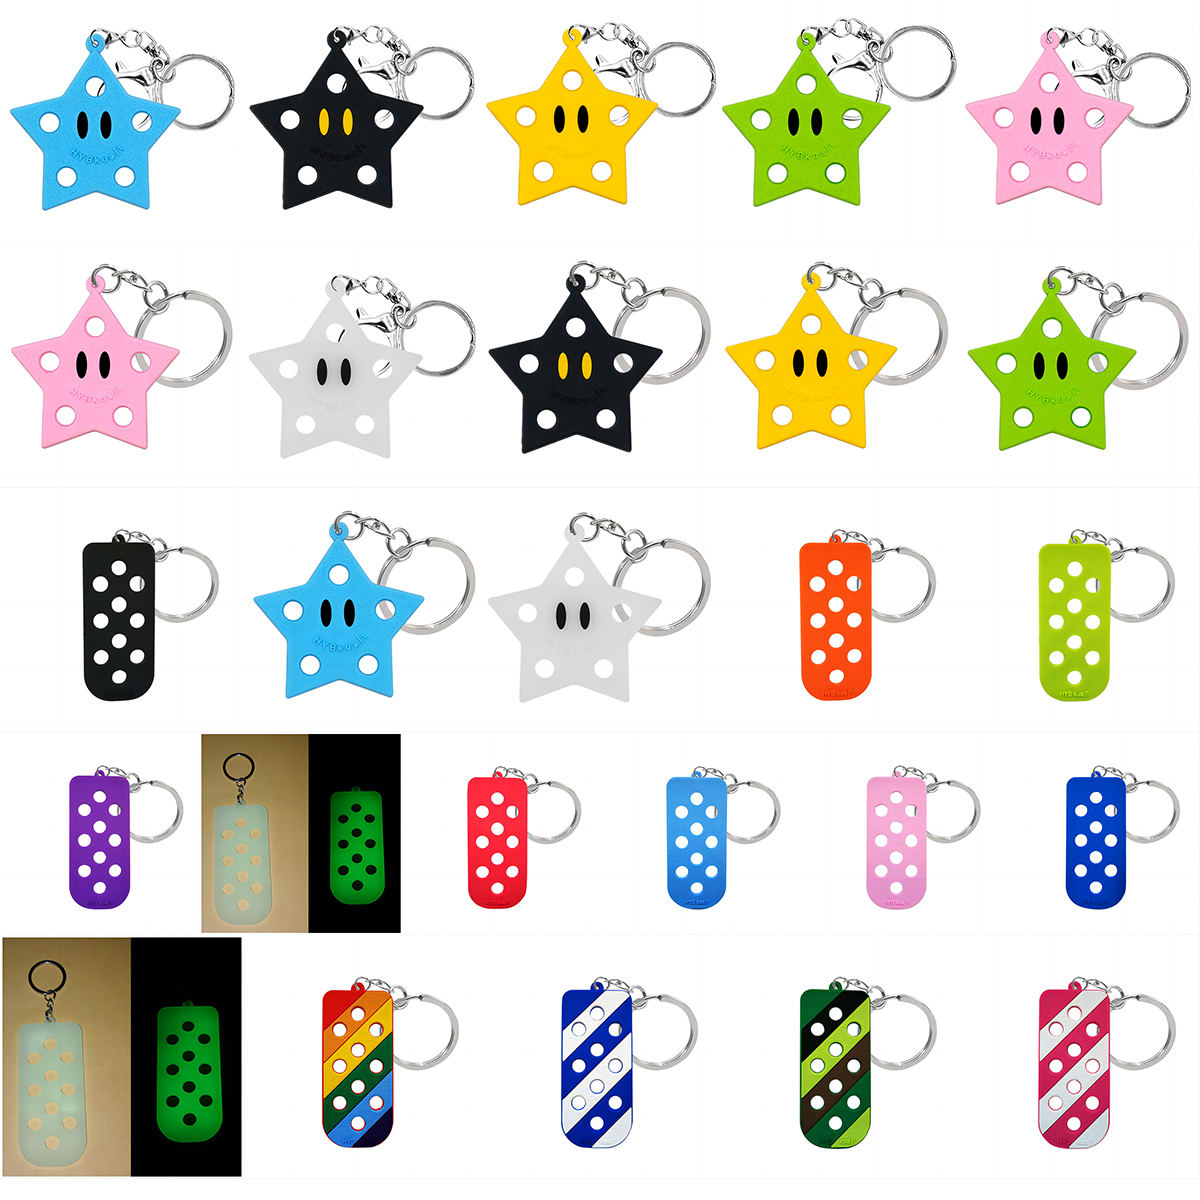 Wholesale Soft EVA PVC Croc Charm Keychain Organizers Key Chain with Hole for Croc Charms Assorted color